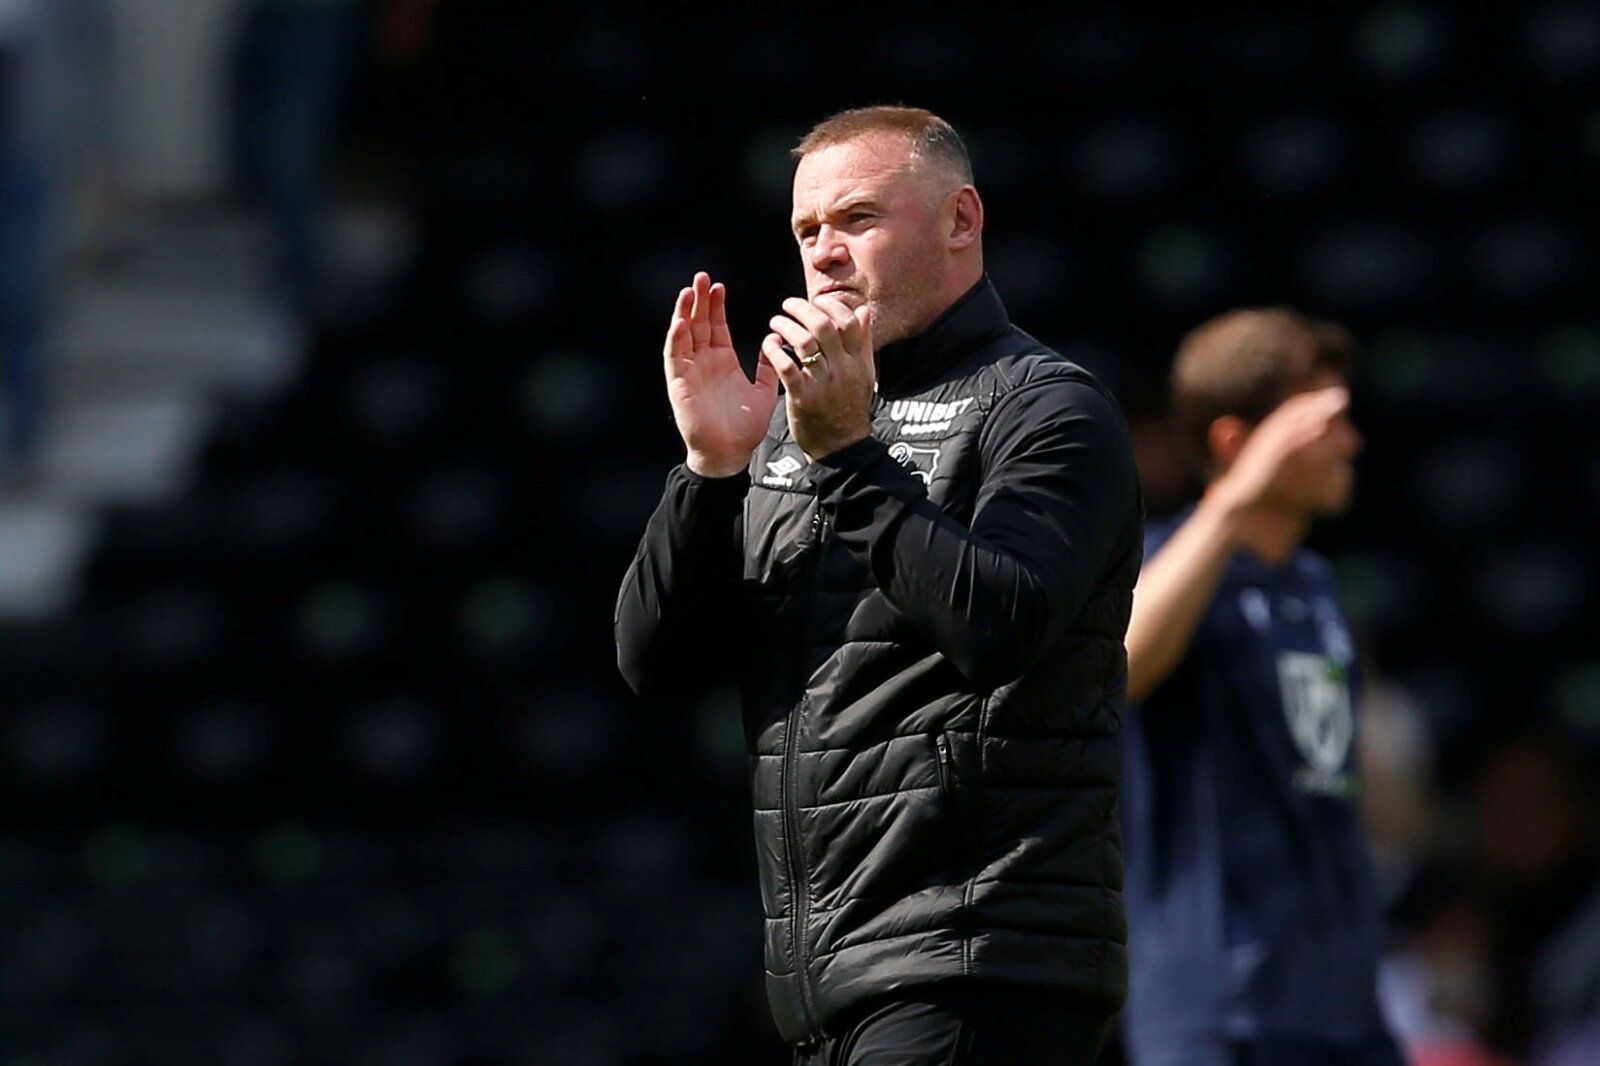 Soccer Football - Championship - Derby County v Nottingham Forest - Pride Park, Derby, Britain - August 28, 2021  Derby County Manager Wayne Rooney applauds fans after the match    Action Images/Craig Brough    EDITORIAL USE ONLY. No use with unauthorized audio, video, data, fixture lists, club/league logos or 